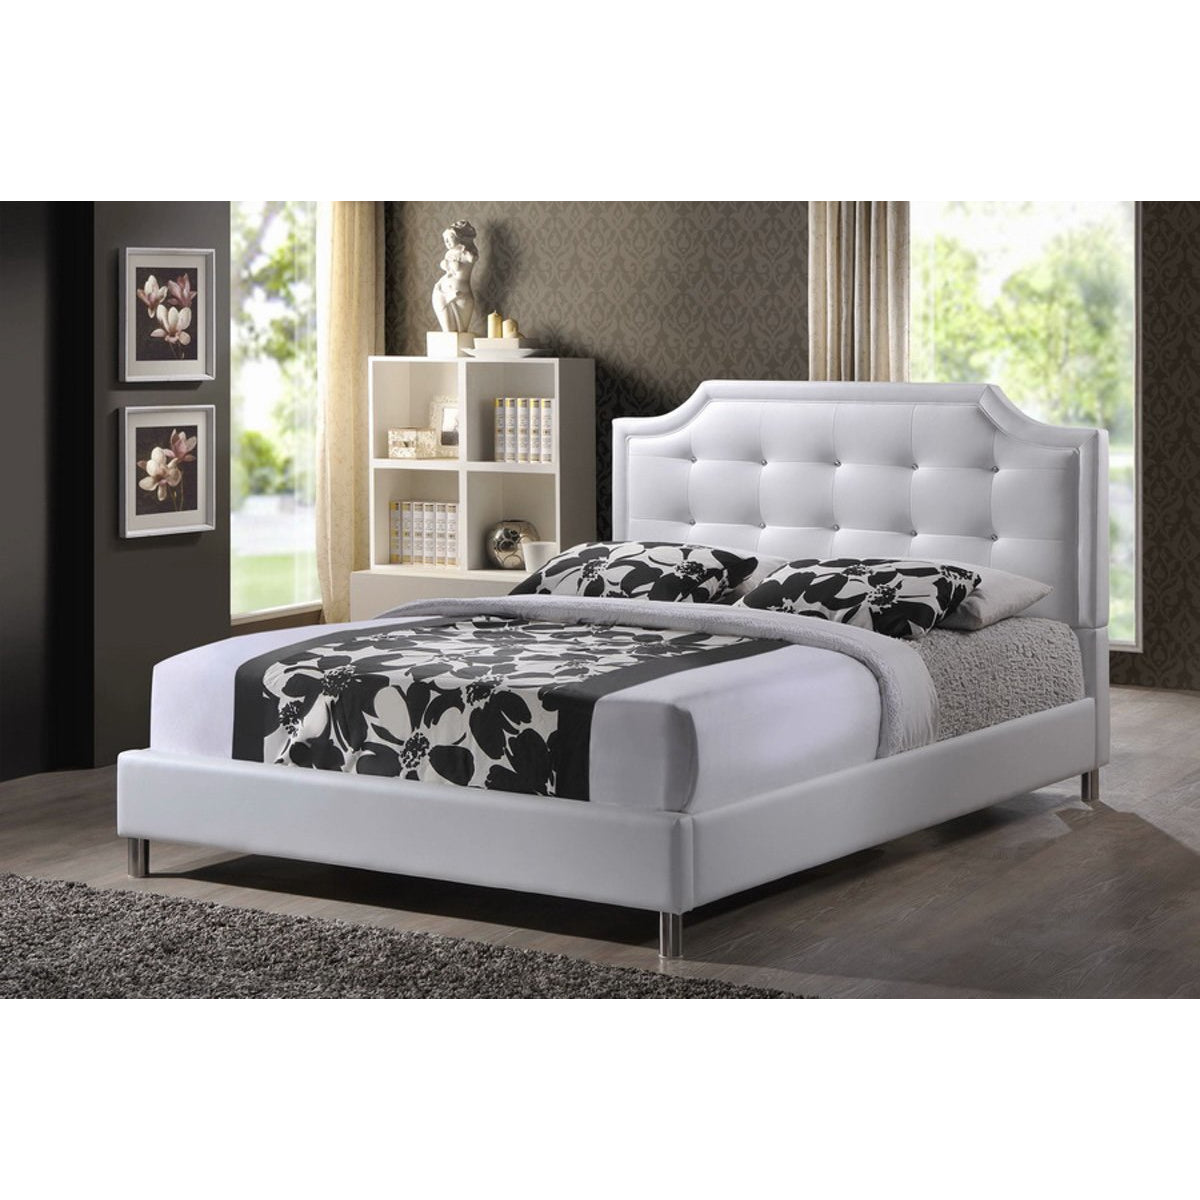 Baxton Studio Carlotta White Modern Bed with Upholstered Headboard - King Size Baxton Studio-beds-Minimal And Modern - 1